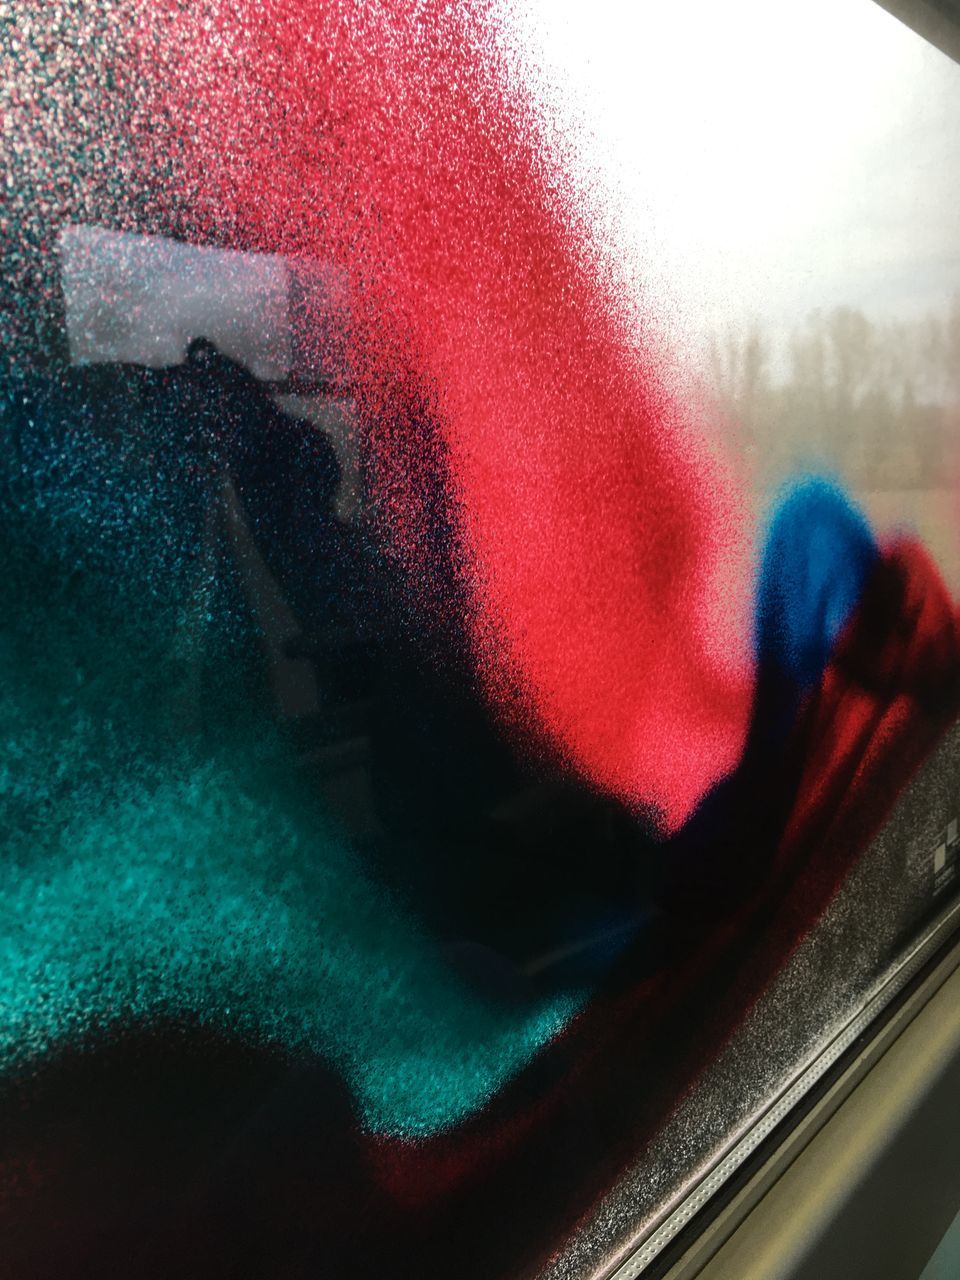 CLOSE-UP OF MULTI COLORED GLASS WINDOW